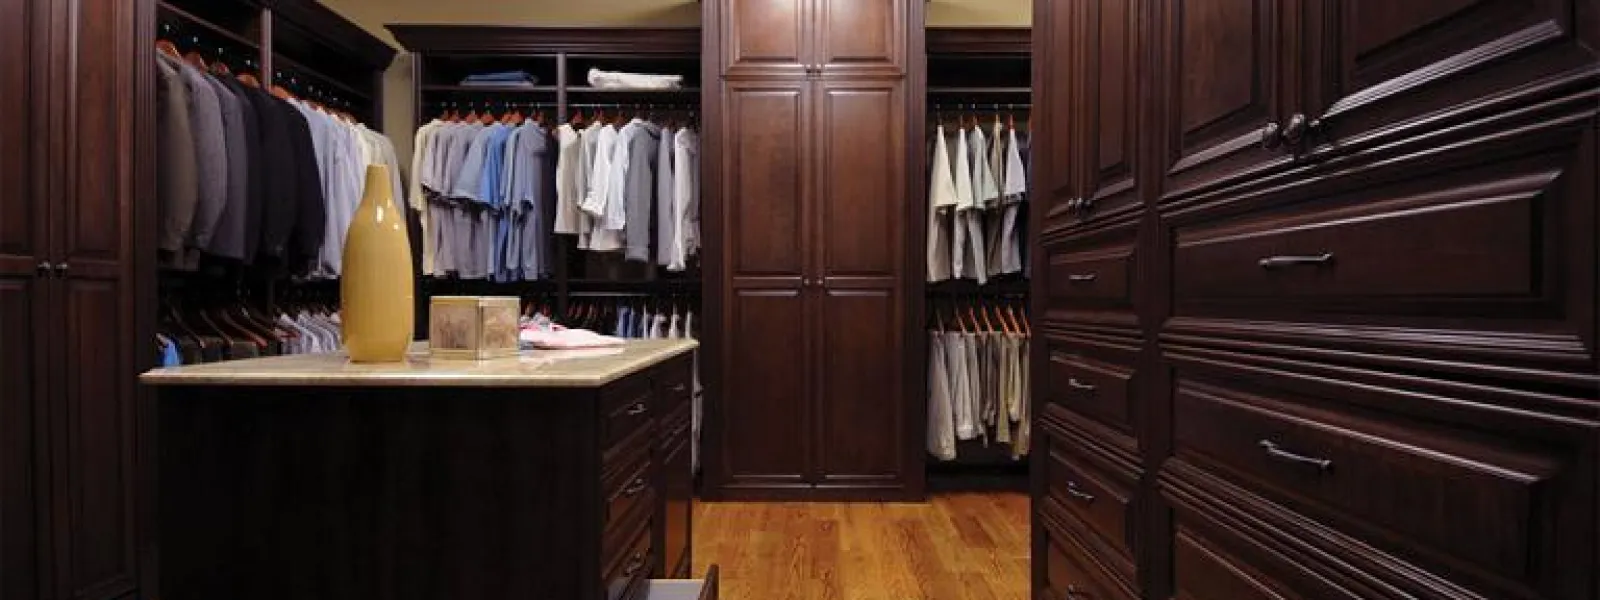 Masculine Custom Closets for the Bachelor Pad